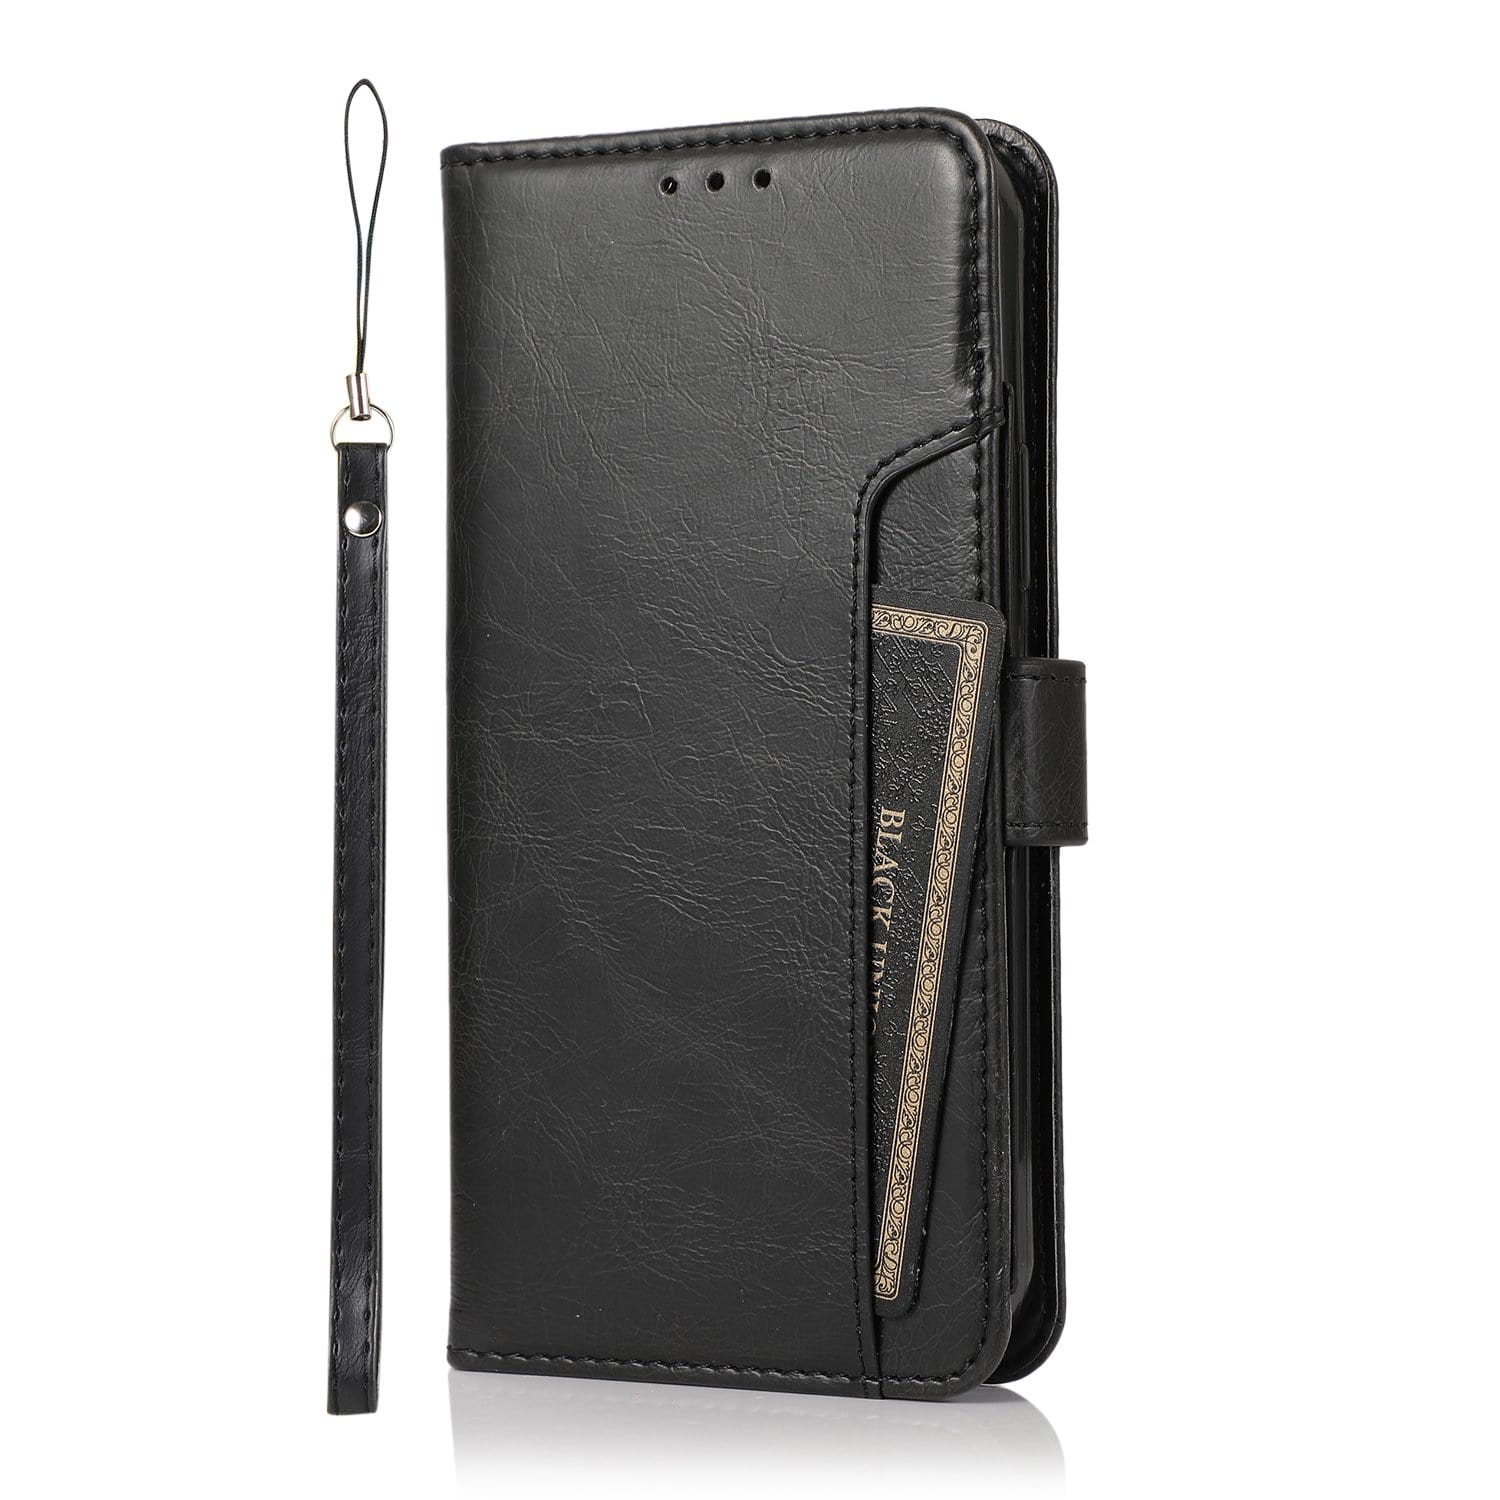 Black Apple iPhone 13 Pro Max Wallet Case - Leather Wallet Series